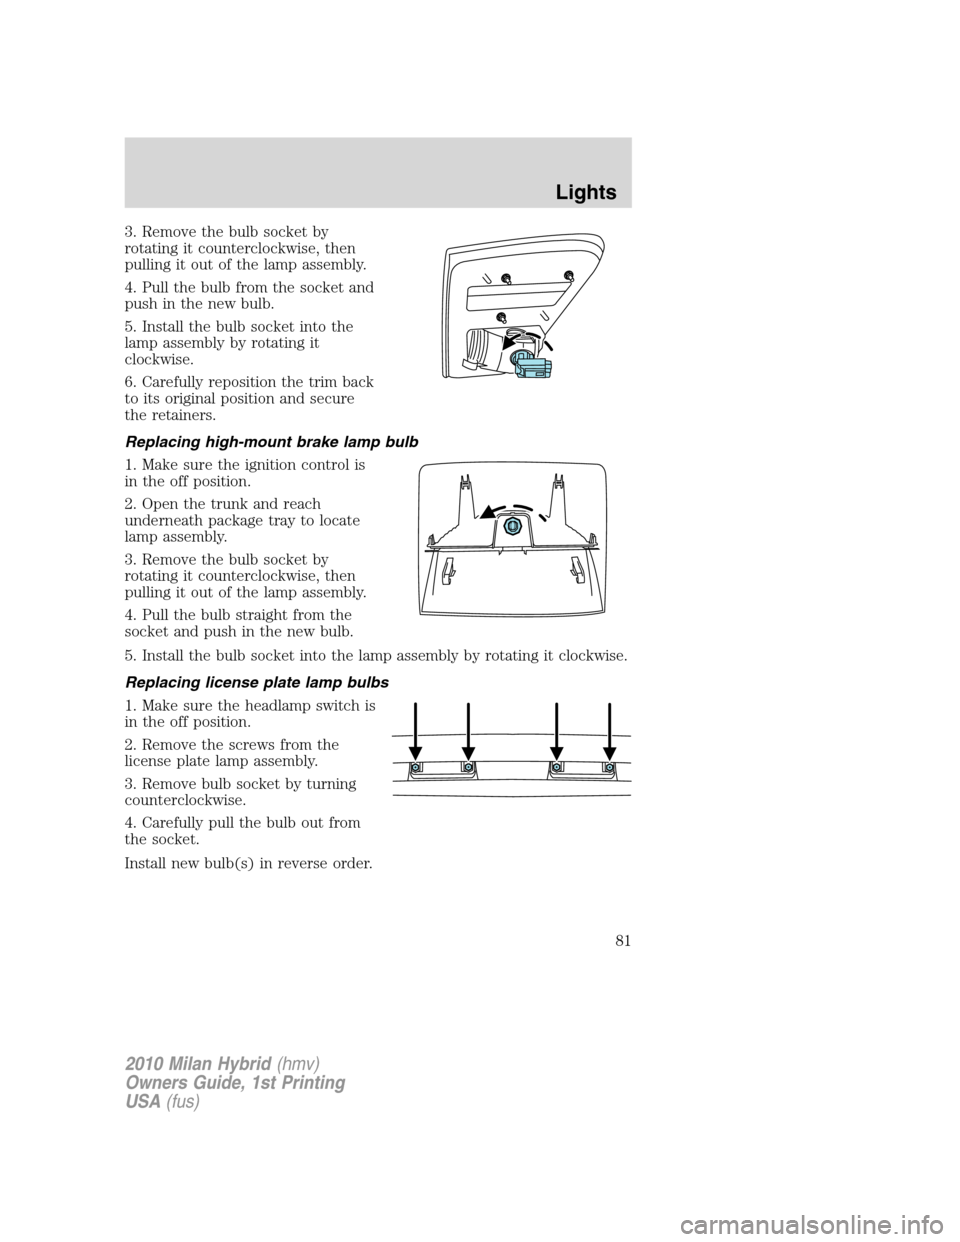 Mercury Milan Hybrid 2010  Owners Manuals 3. Remove the bulb socket by
rotating it counterclockwise, then
pulling it out of the lamp assembly.
4. Pull the bulb from the socket and
push in the new bulb.
5. Install the bulb socket into the
lamp